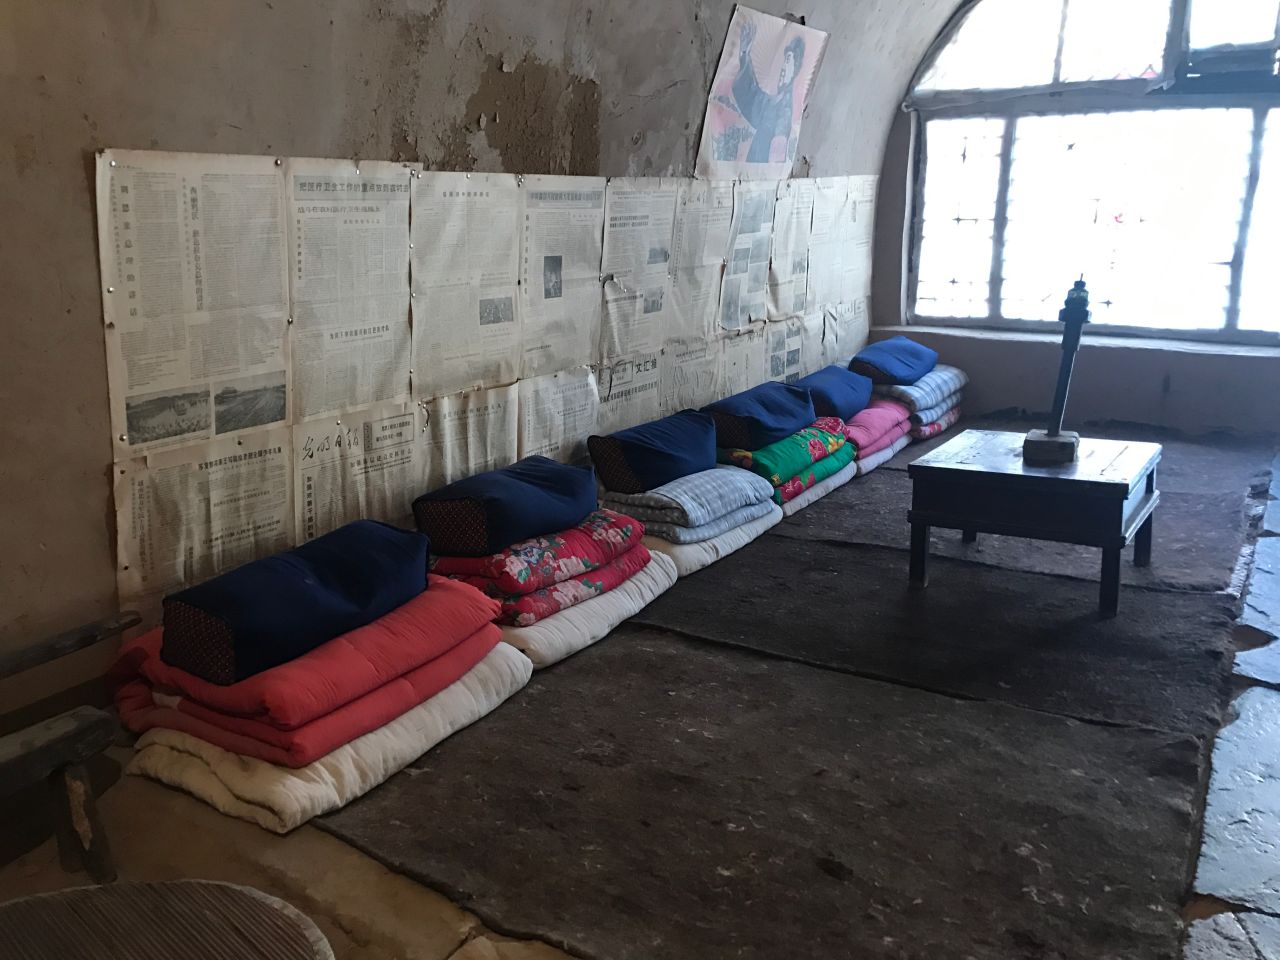 Xi's bed (shared with five others with his spot being the second from left) in his "cave house."